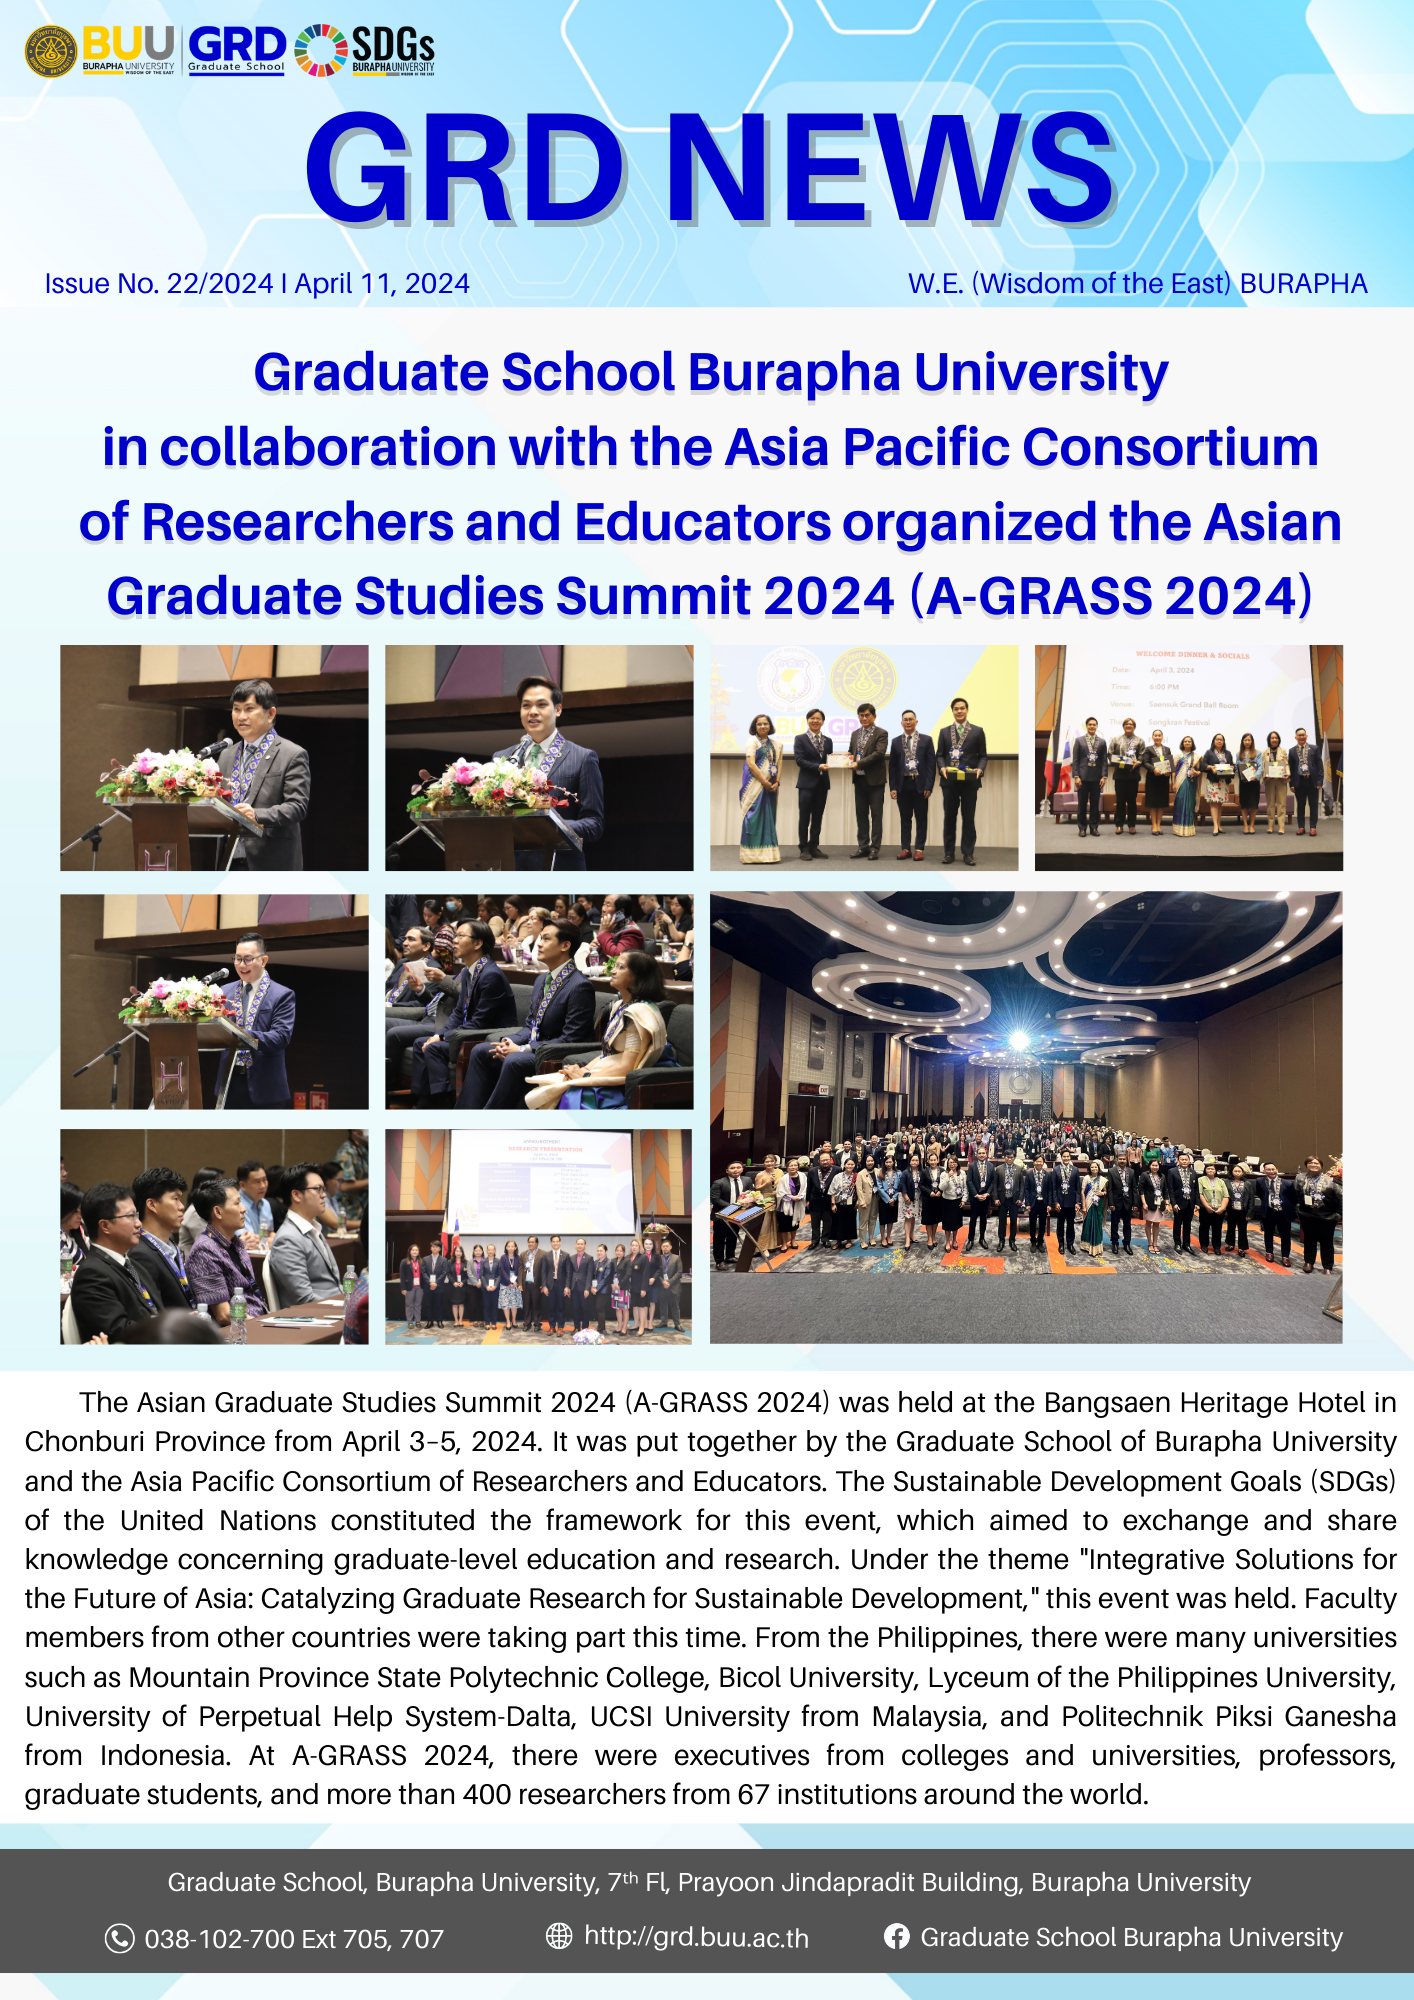 Graduate School Burapha University in collaboration with the Asia Pacific Consortium of Researchers and Educators organized the Asian Graduate Studies Summit 2024 (A-GRASS 2024)